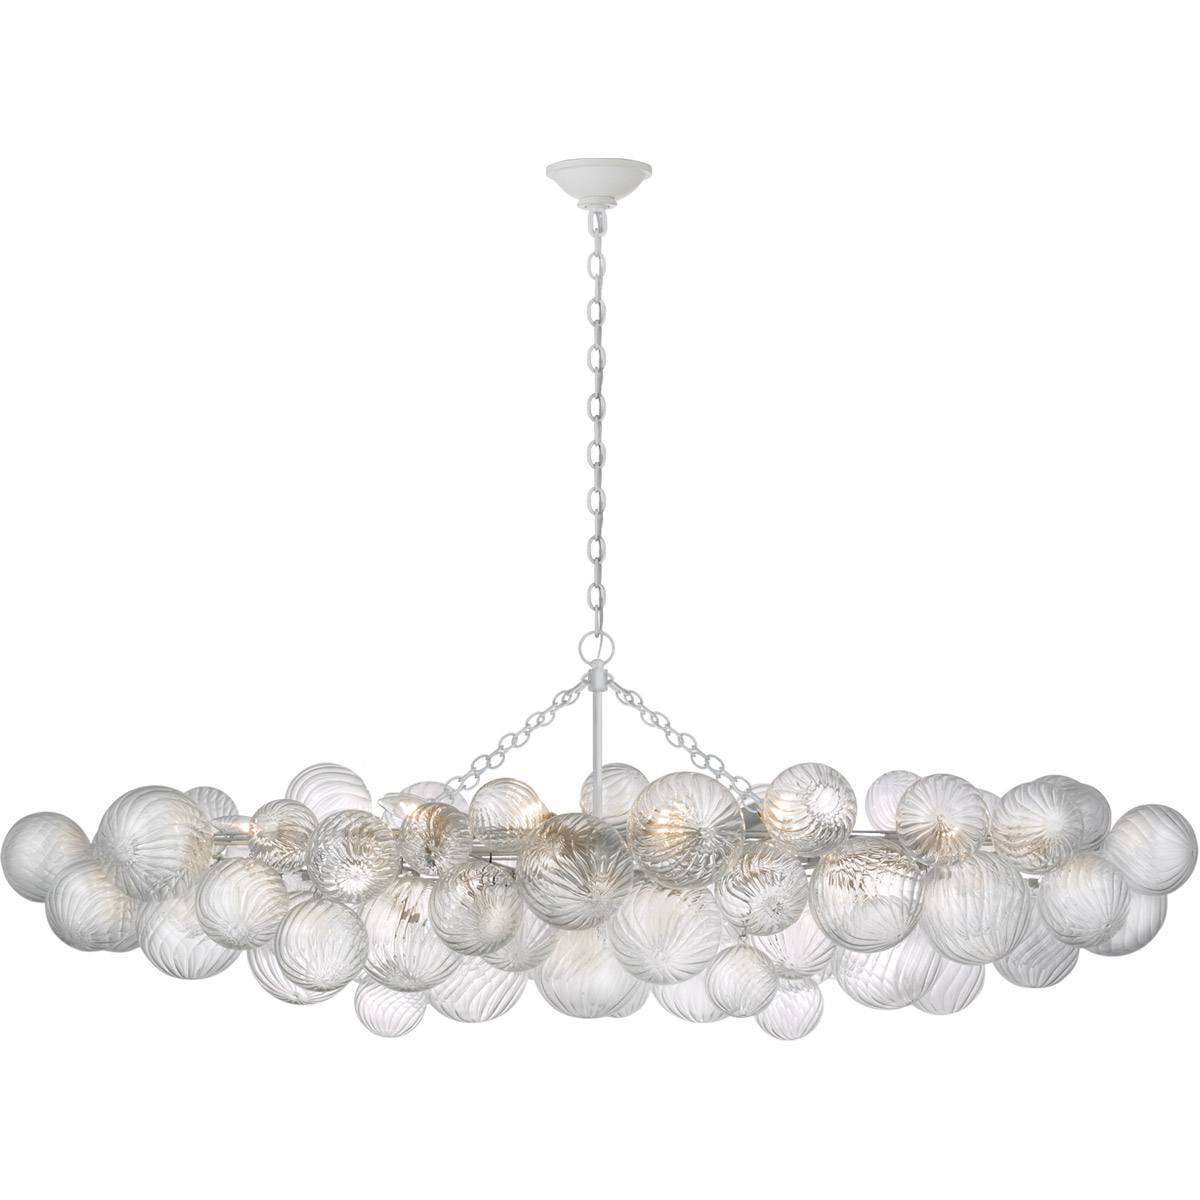 Visual Comfort Signature Collection | Visual Comfort JN5117PW-CG Julie  Neill Talia Linear Chandelier Ceiling Light in Plaster White, Large